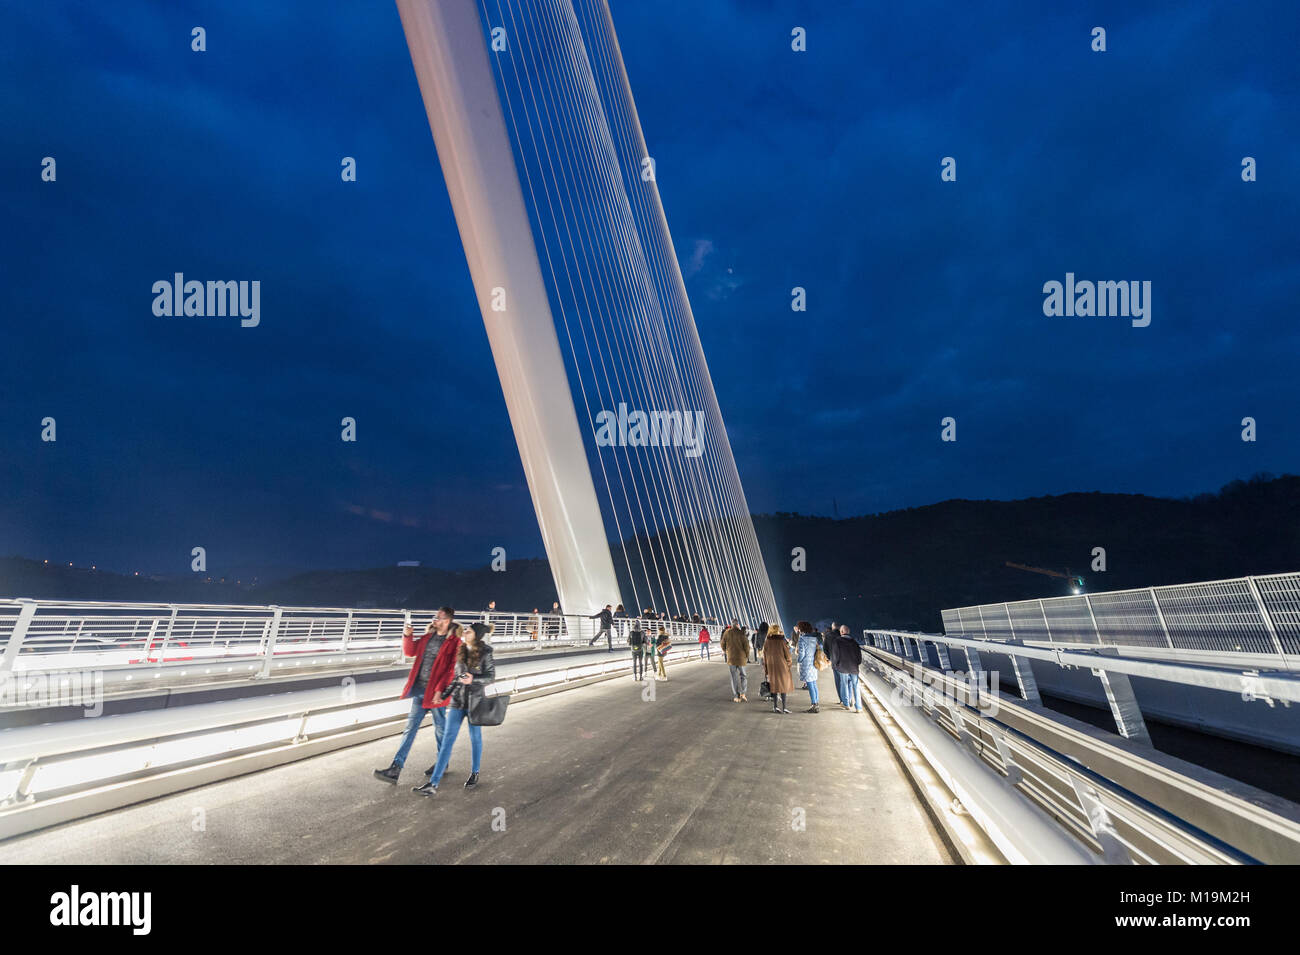 Cosenza, a night view of the new bridge bridge built in Cosenza, designed by architect and engineer Santiago Calatrava, named after San Francesco di Paola, the patron saint of Calabria. The bridge was inaugurated on January 27, 2018, and was designed and built in the shape of a harp, it is 104 meters tall, has a 130 meter long pylon and is inclined to 52 degrees from which the tie rods depart. around 20 million euros. It is currently considered one of the largest works made in the south. The bridge connects the two banks of the river Crati connecting the district Gergeri with Via Popilia. 28/0 Stock Photo